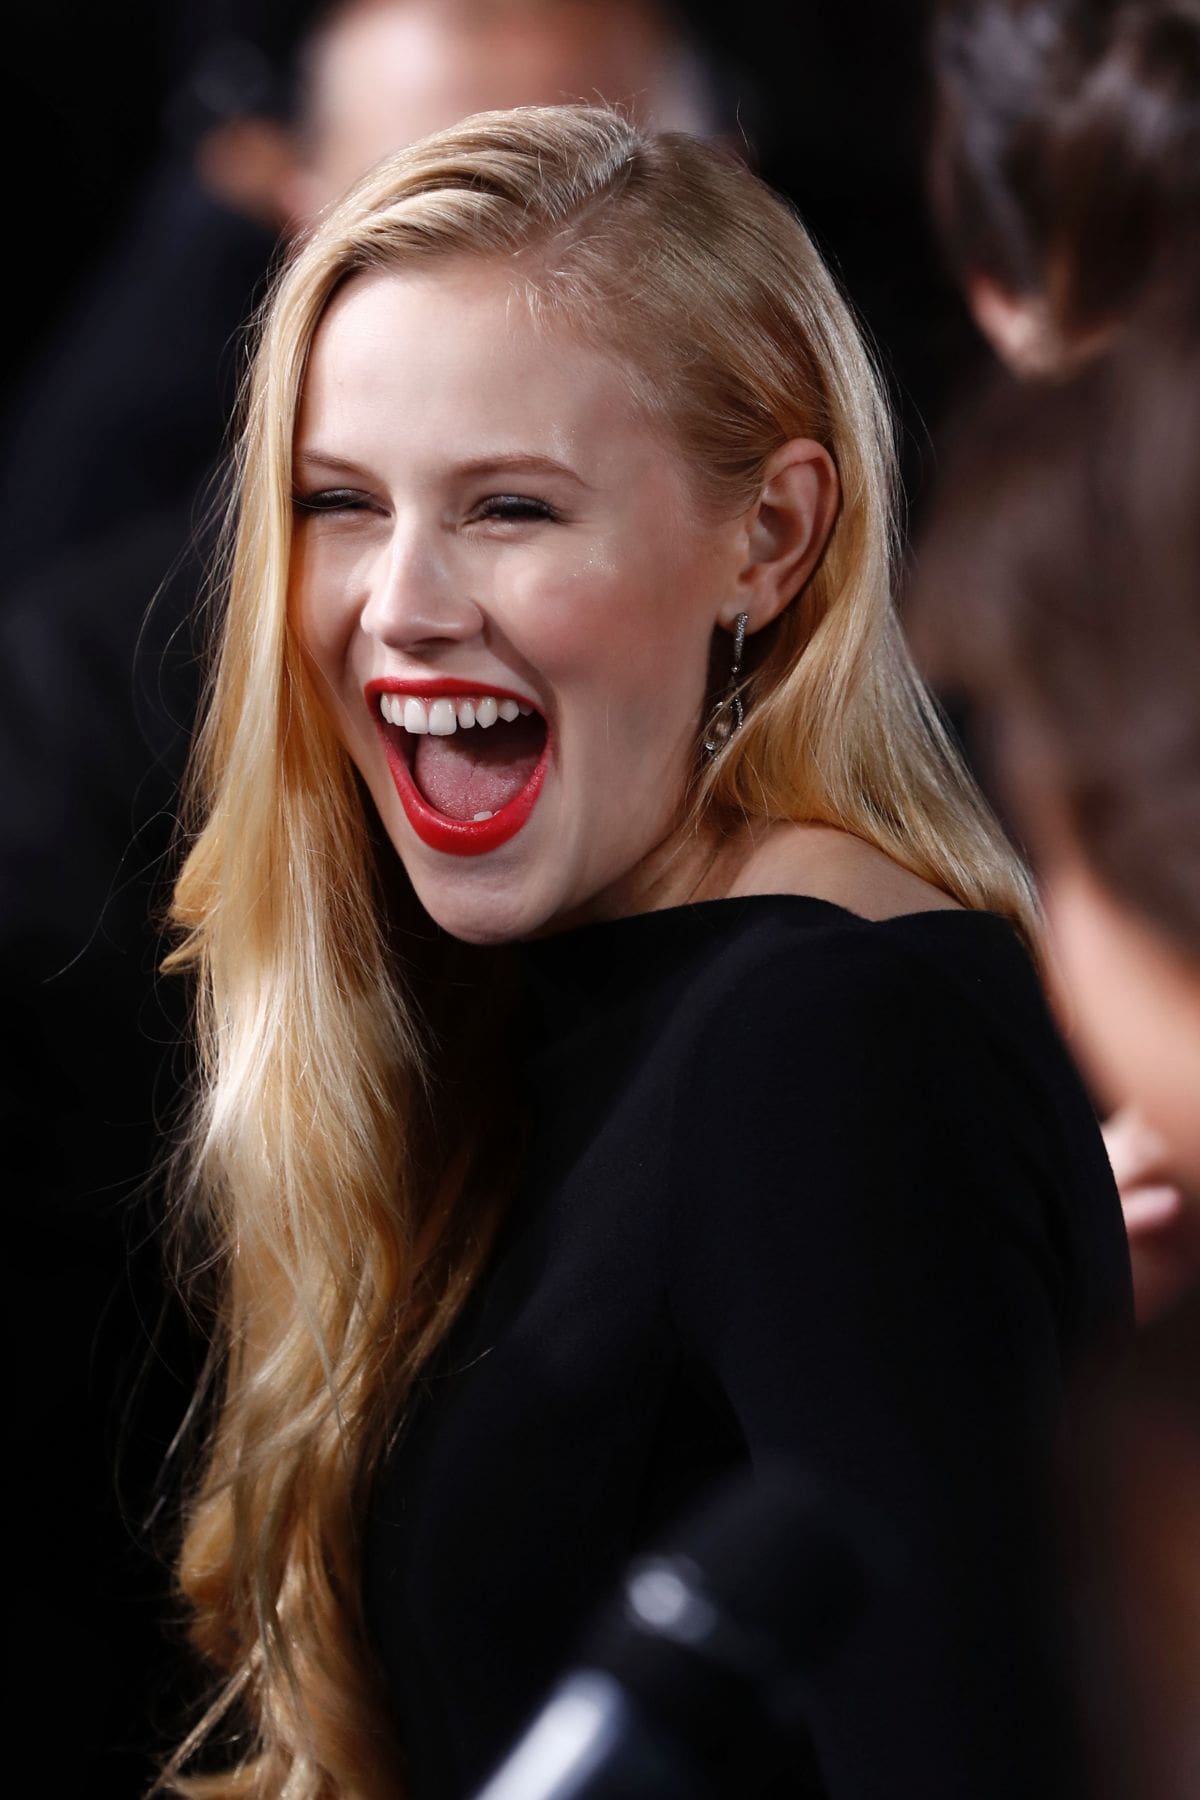 Danika Yarosh posing for the photo with a dark grey hair and a big laughter in her face.